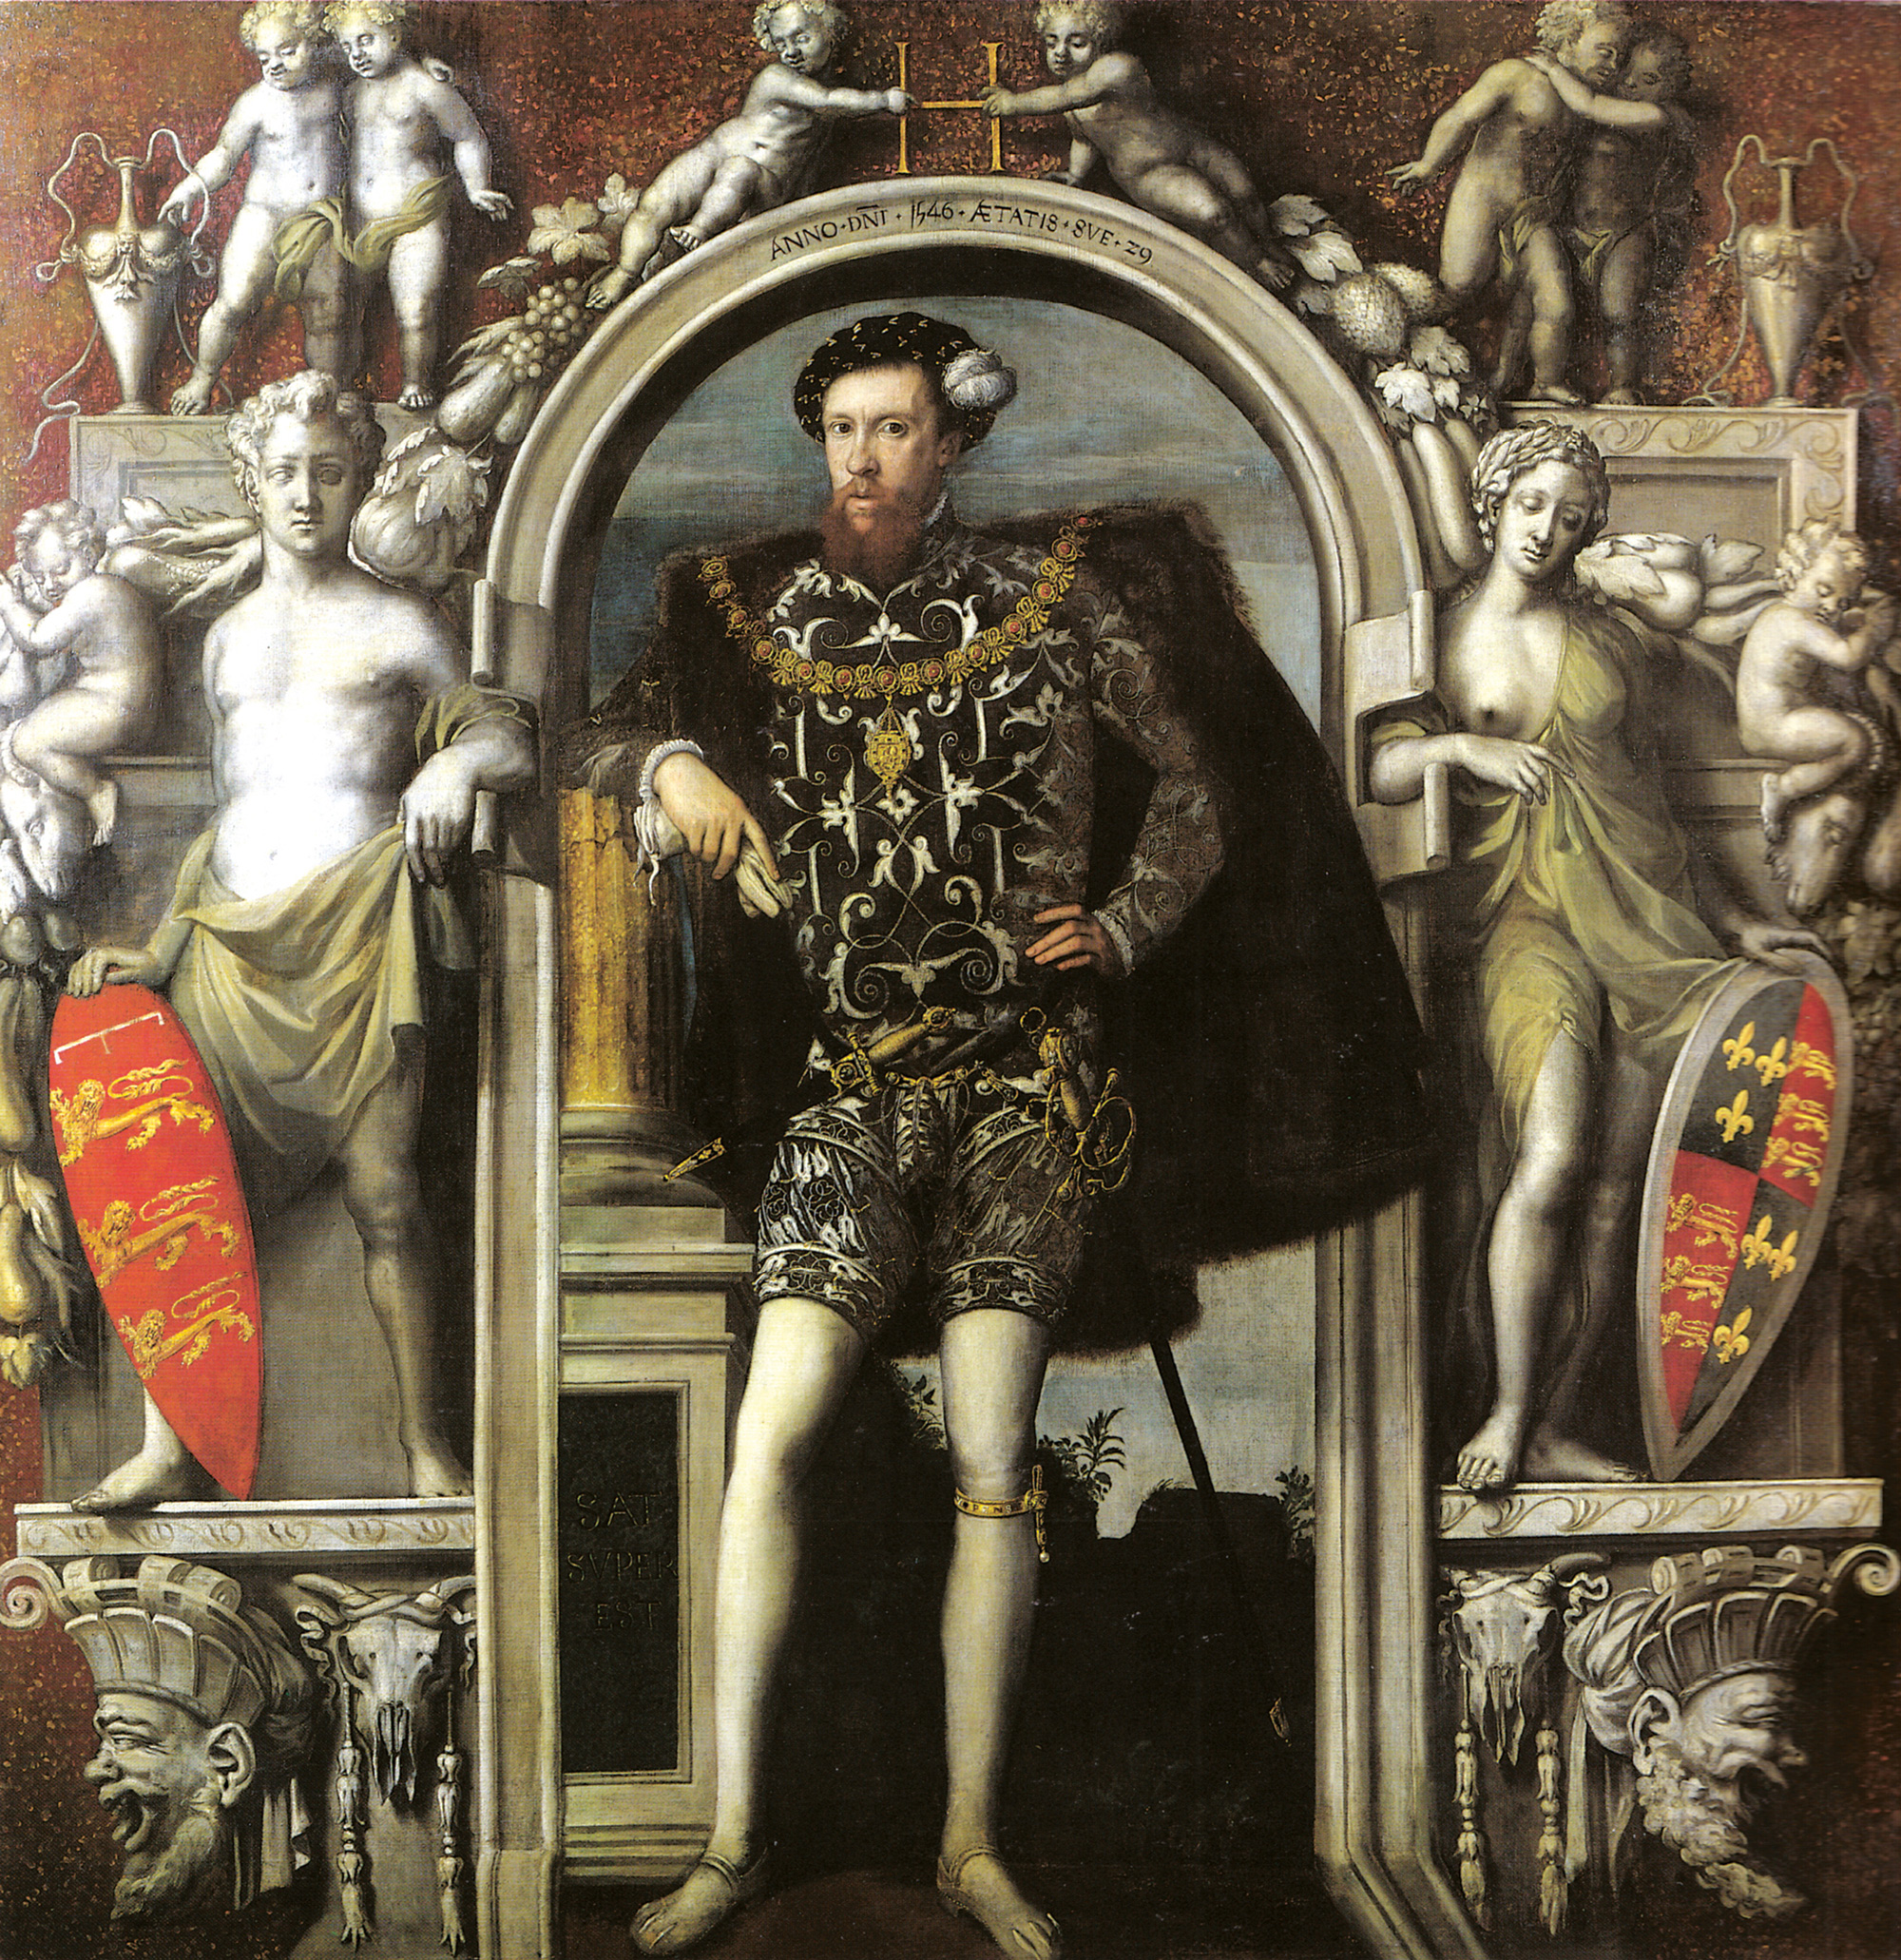 A portrait of the proud earl, the most painted man at court after Henry VIII himself, attributed to the court painter William Scrots. Here Surrey is depicted leaning on a broken pillar under the arms of Thomas of Brotherton, son of Edward I, and Thomas of Woodcock, son of Edward III. His use of heraldry to locate himself in the royal lineage, perhaps maneuvering to be Protector to the king’s heir, was the principal charge against him when he was brought to trial for treason and executed in 1547. The date of the portrait is uncertain: perhaps made from life, at his commission; perhaps a memorial to his ambitions, when both he and the king who had killed him were dead.